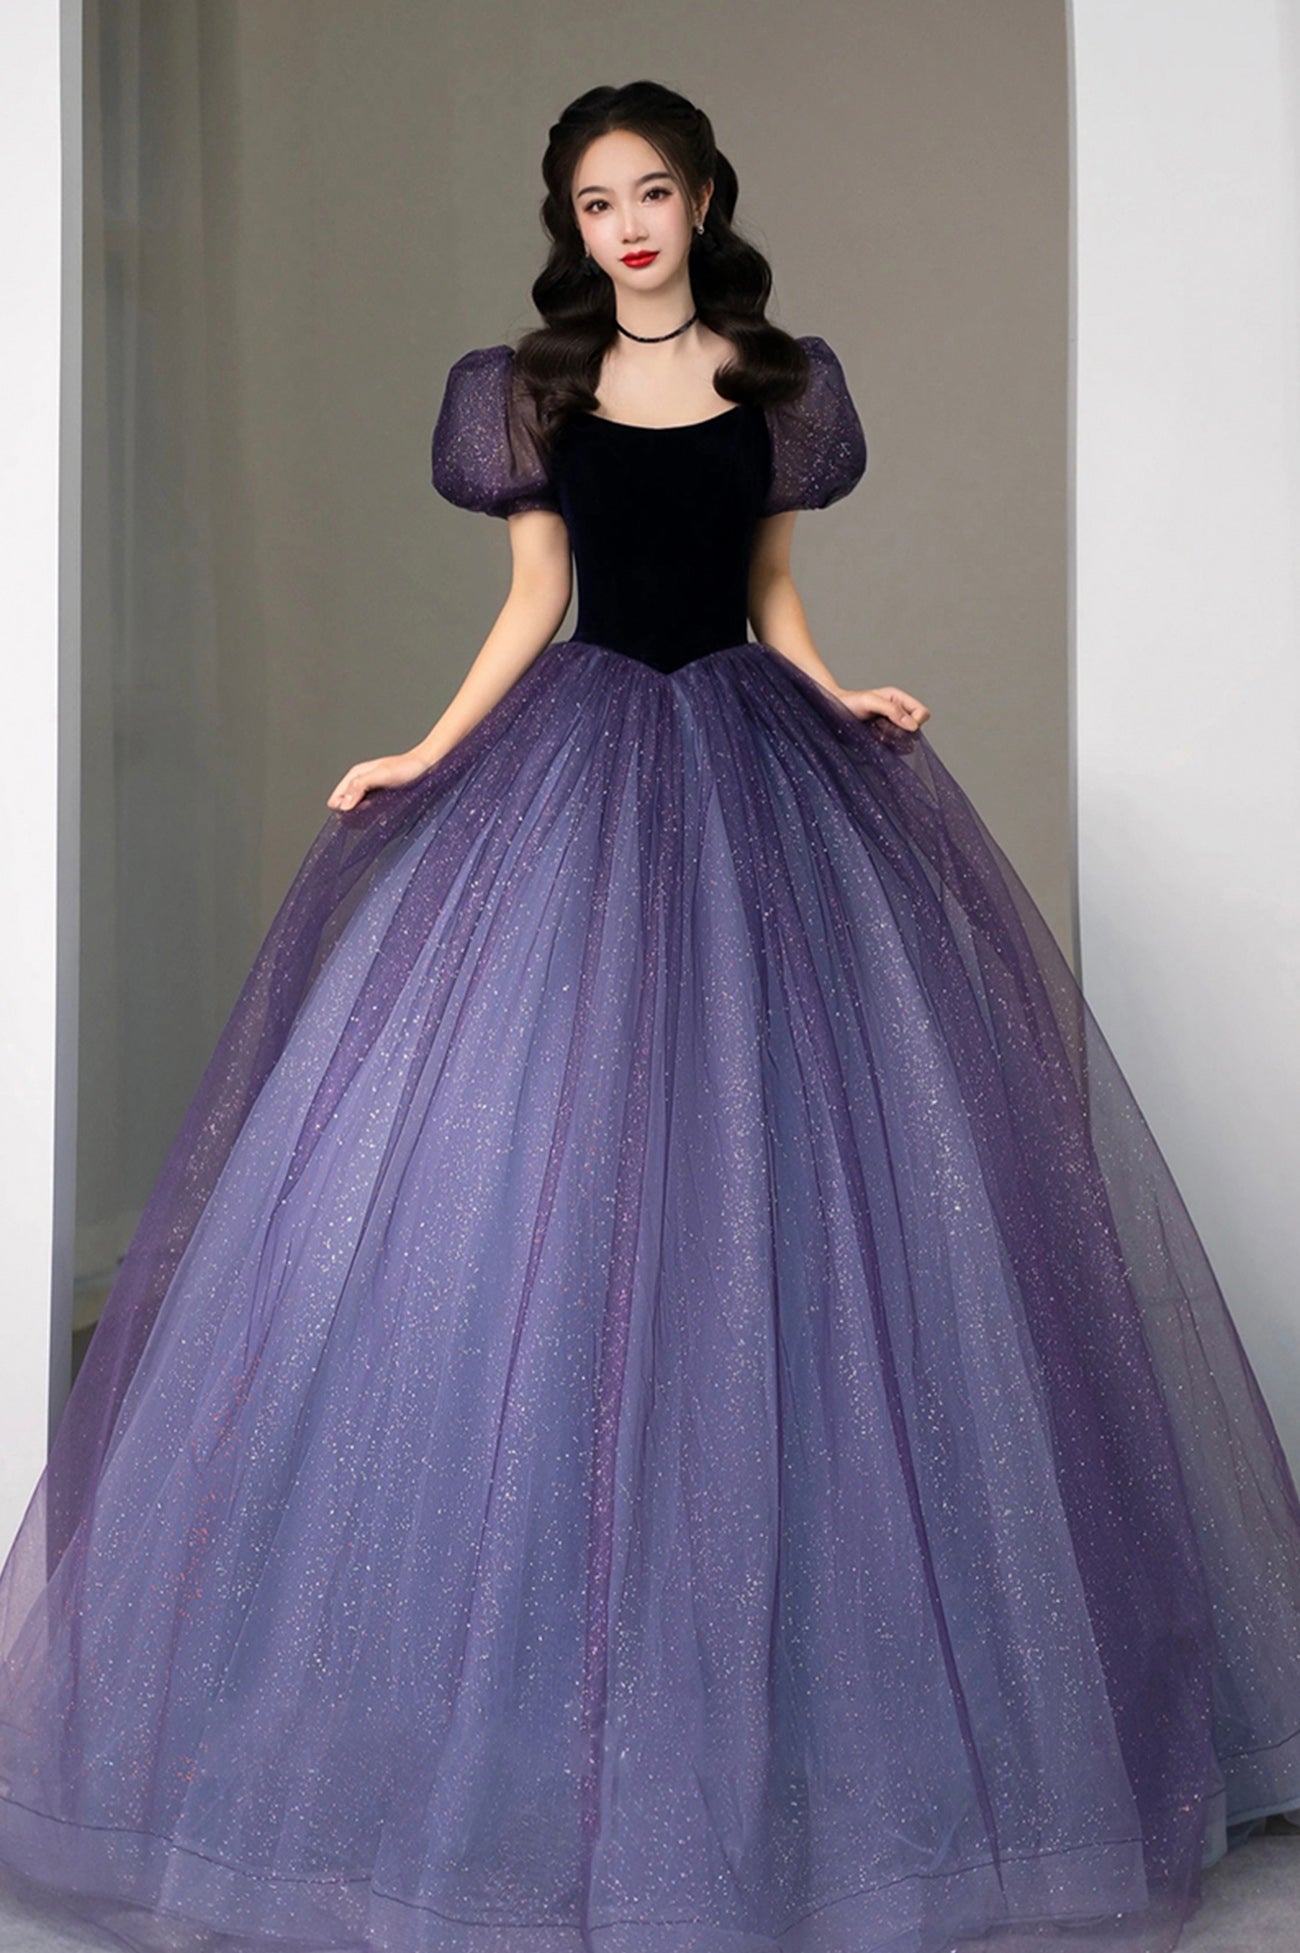 2020 Gothic Plus Size Black Purple Gothic Wedding Dresses Steampunk  Victorian Halloween Ball Gown For Vampire Country Garden Brides BR240I From  E_cigarette2019, $158.1 | DHgate.Com